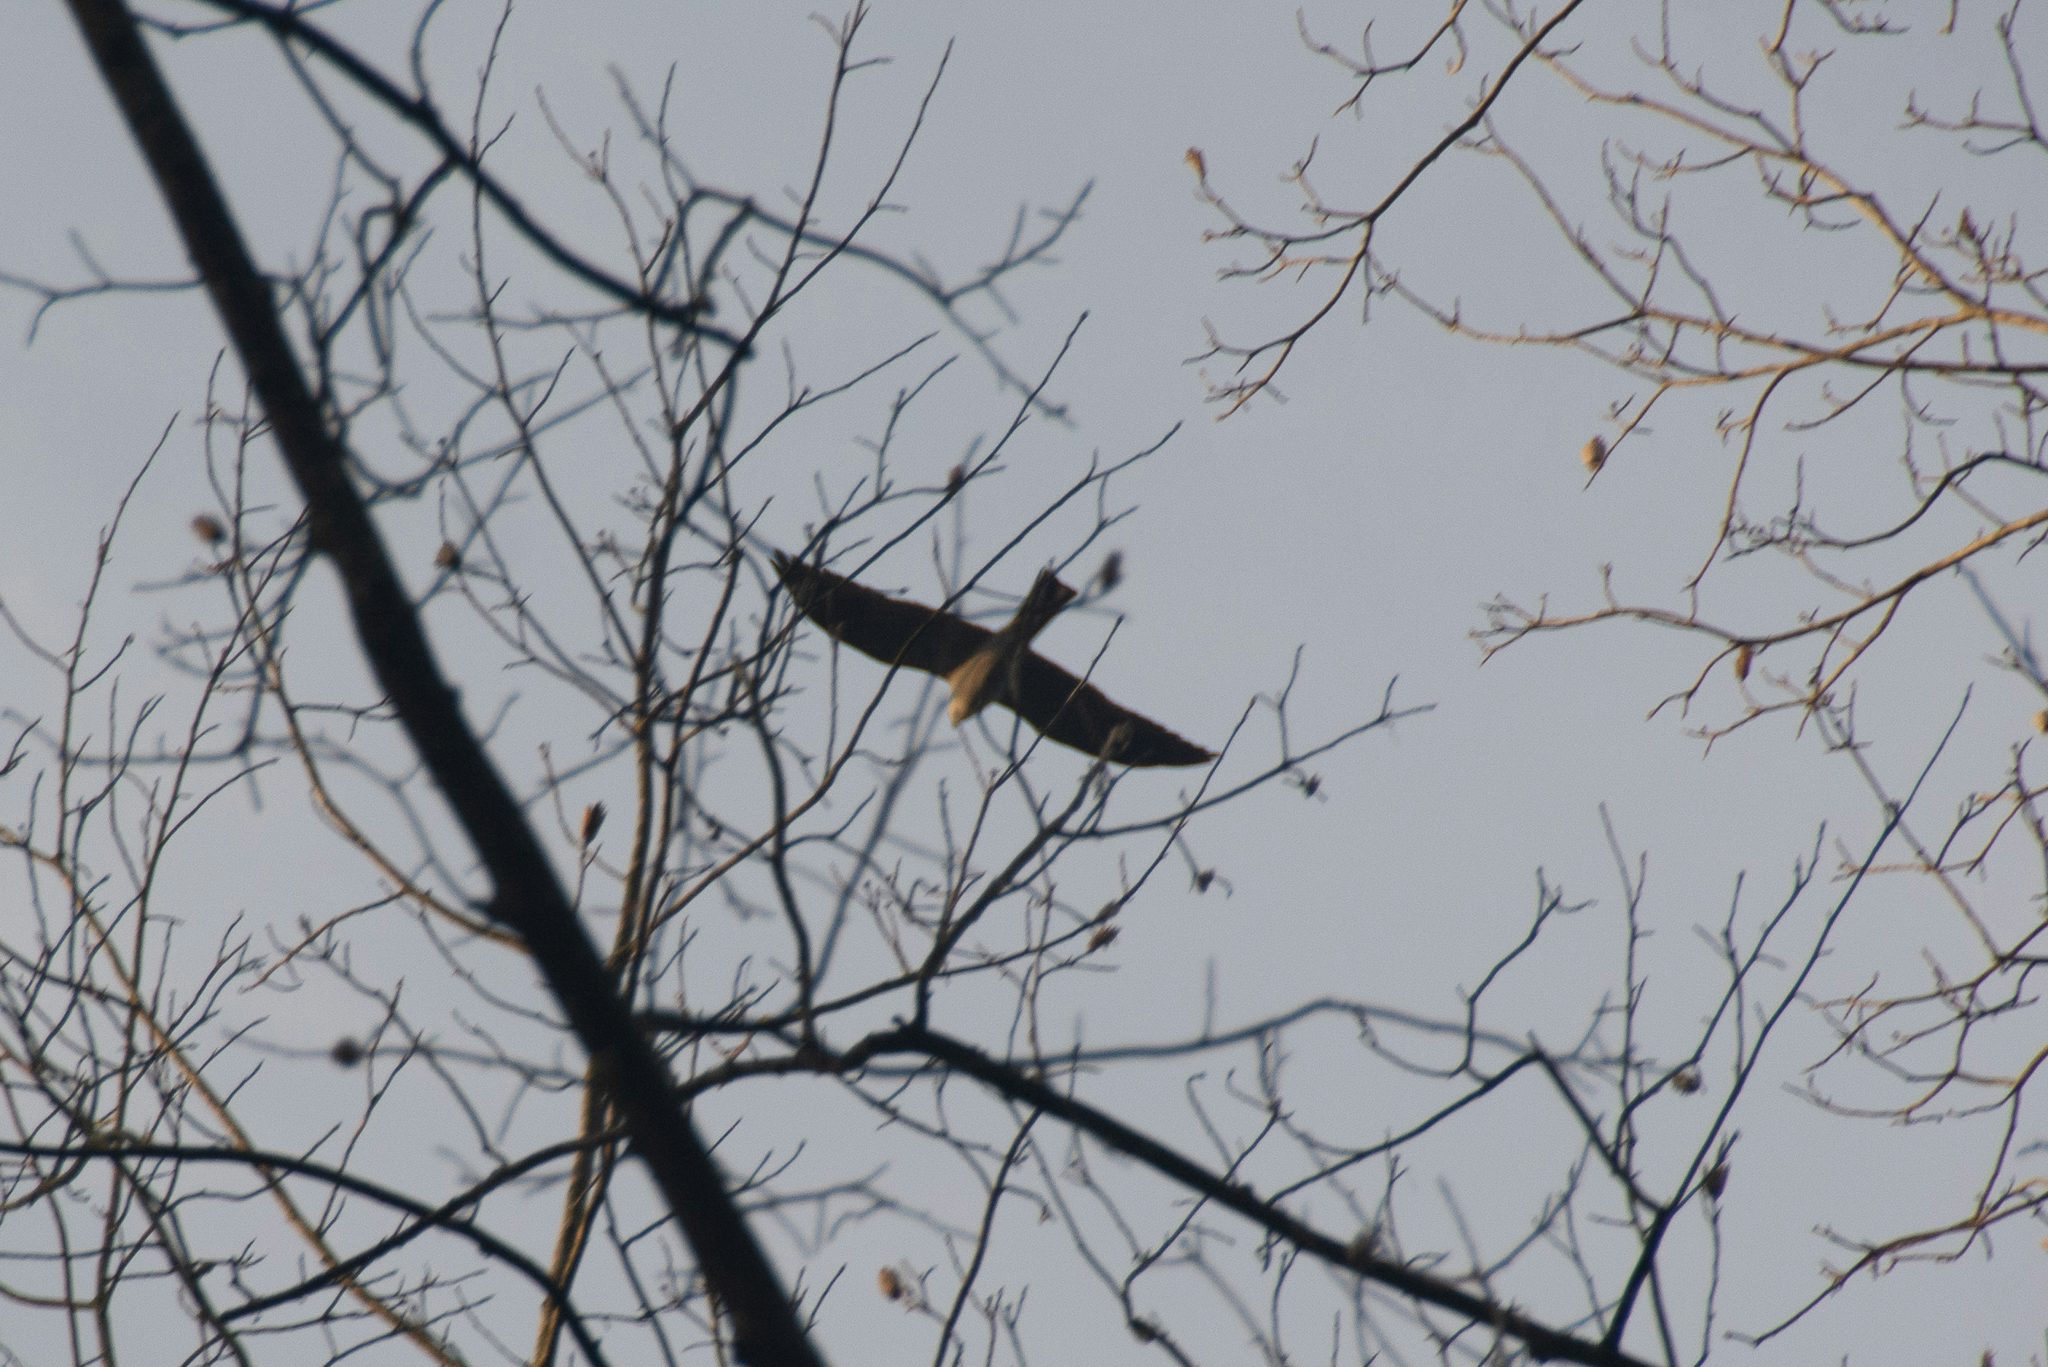 A sleek raptor with long, pointed wings and a square tail flies over the bare branches of a treetop, half-silhoutted against a gray morning sky